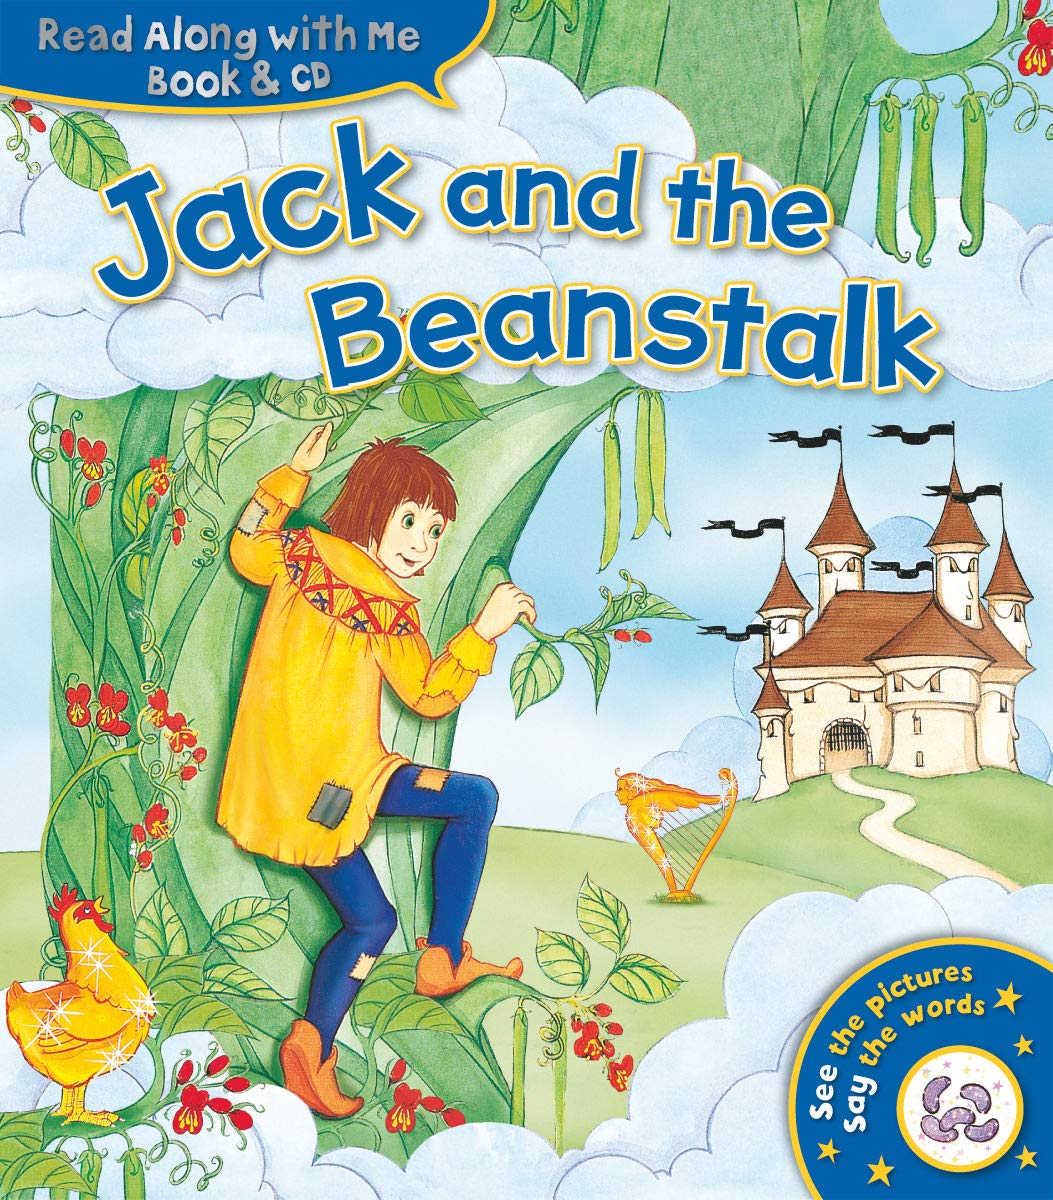 Jack and the Beanstalk Read Along with Me (Book & CD)